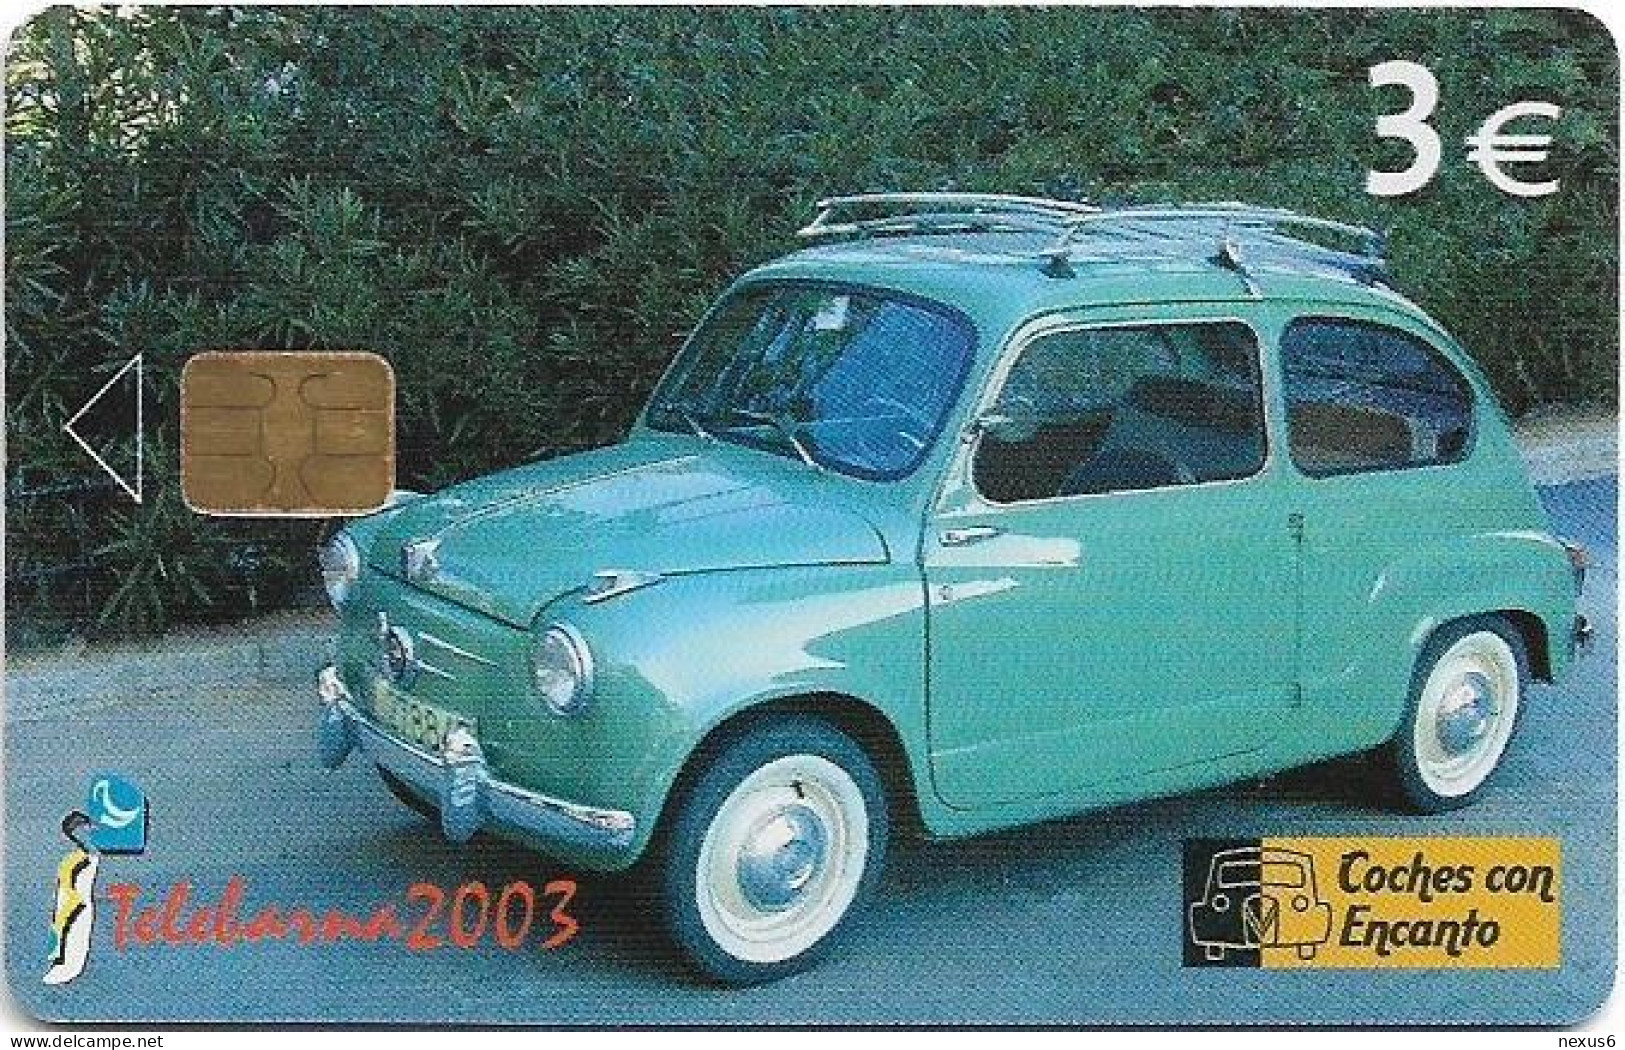 Spain - Telefónica - Coches Con Encanto - Seat 600 - P-534 - 09.2003, 5.000ex, Used - Private Issues